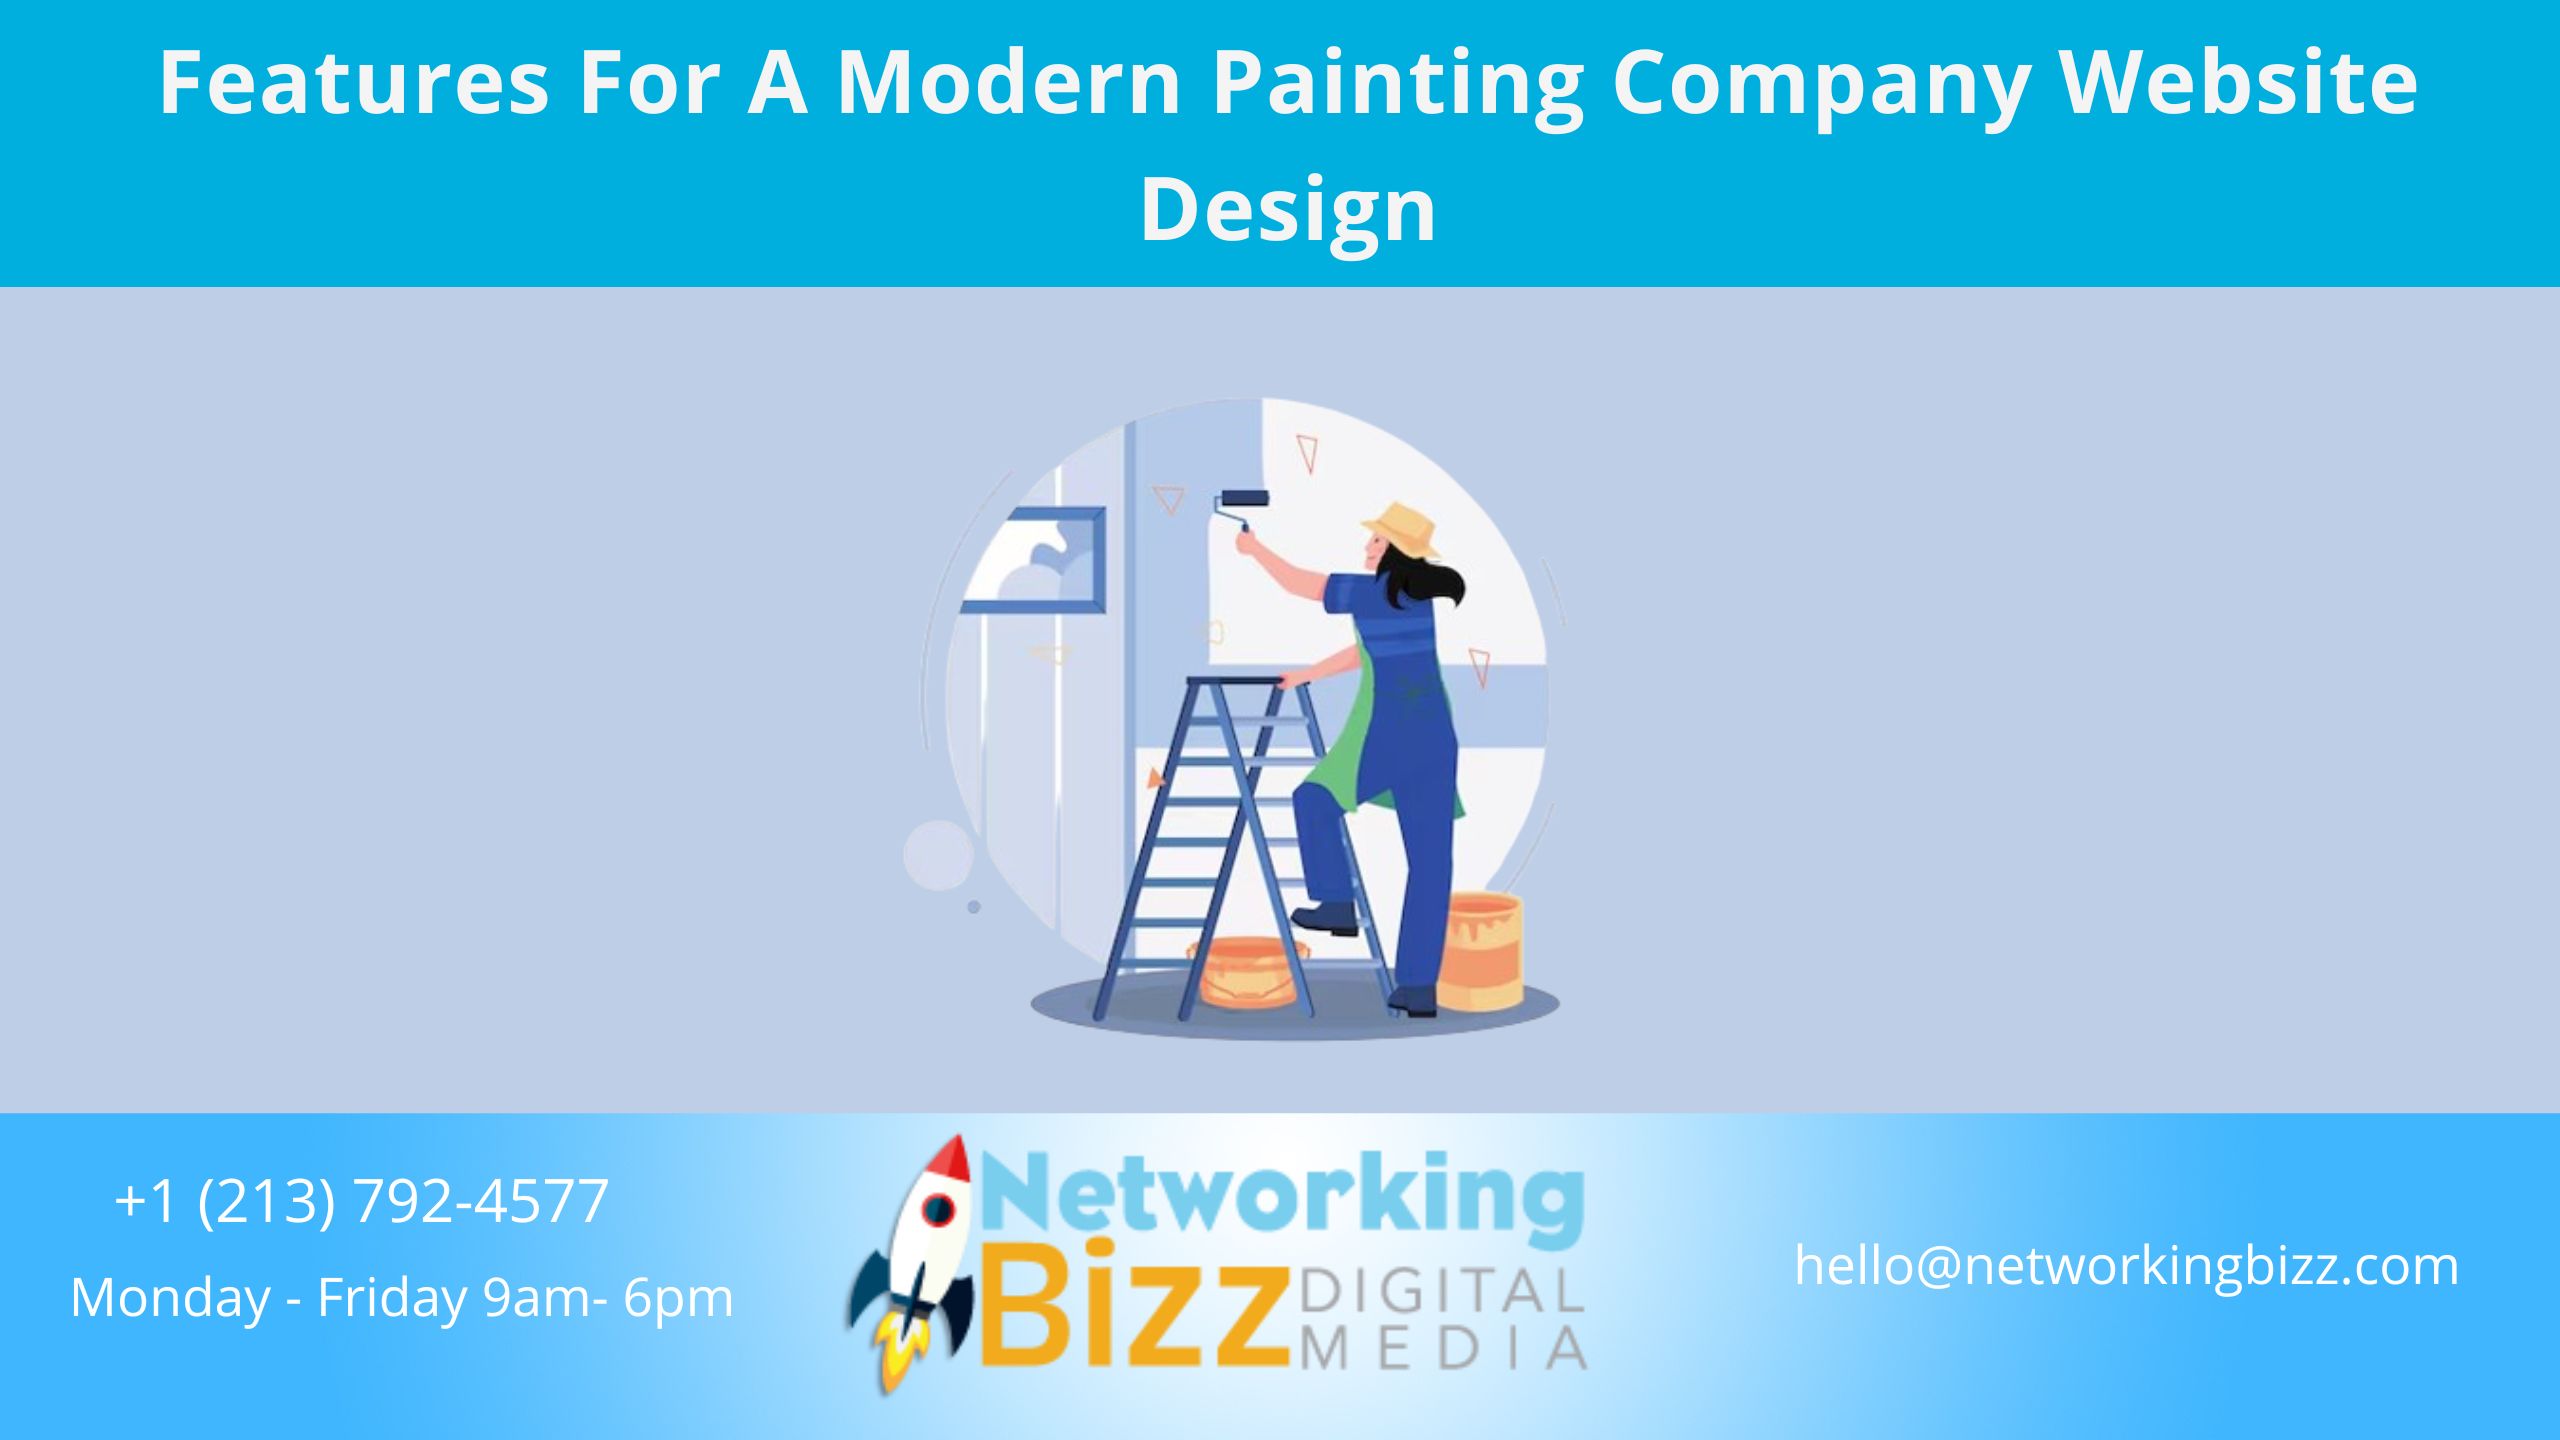 Features For A Modern Painting Company Website Design